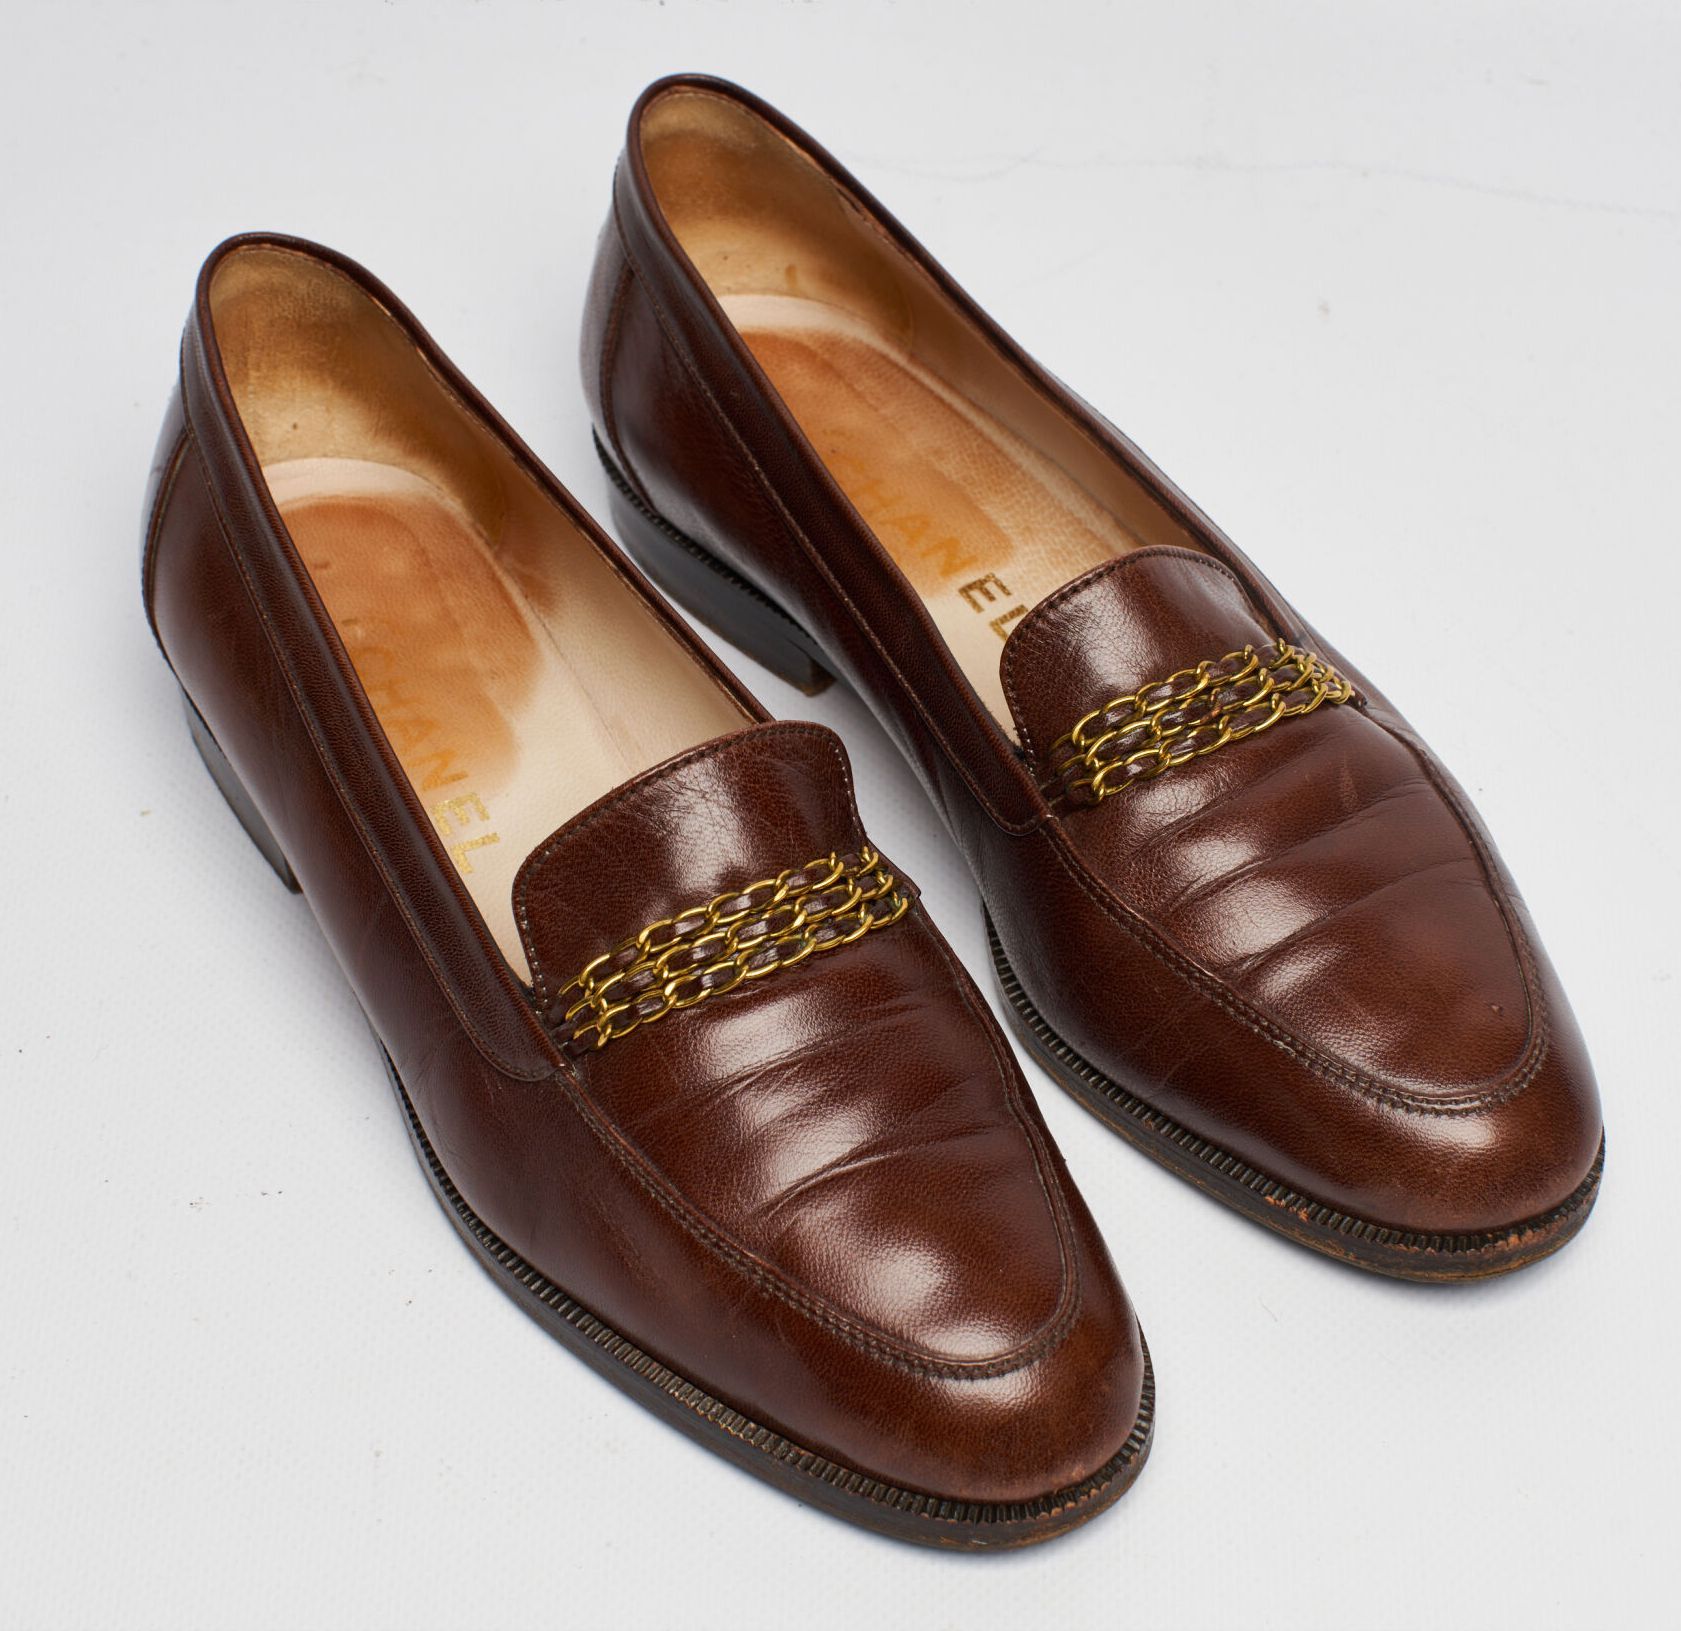 CHANEL. Pair of brown leather loafers adorned with inte…